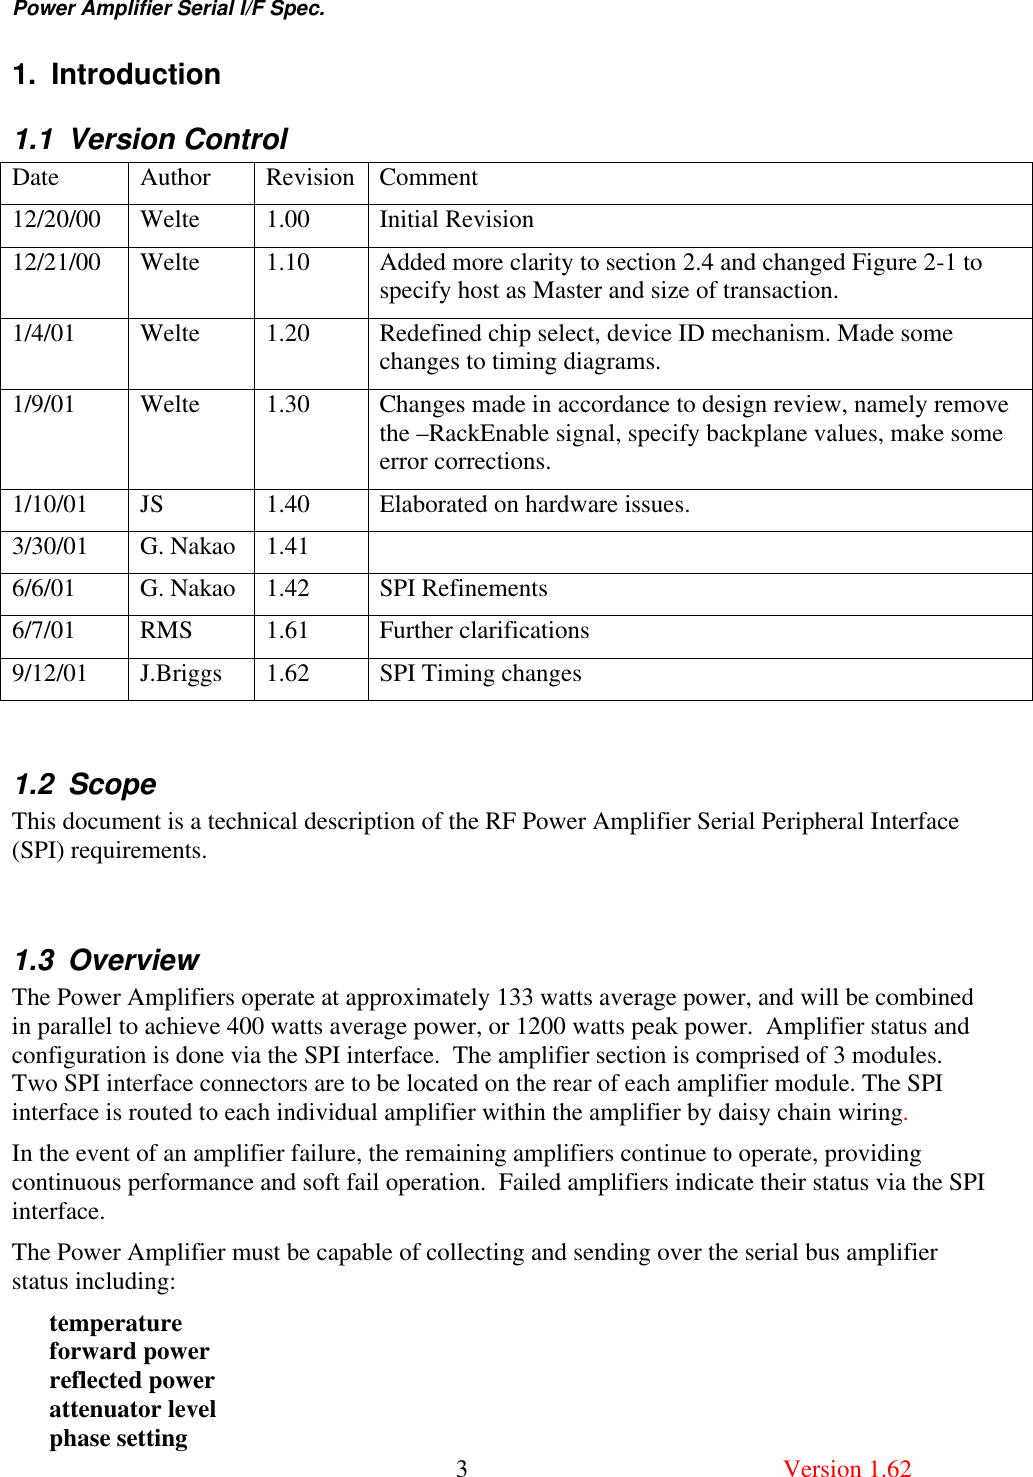 Power Amplifier Serial I/F Spec.       3  Version 1.62 1. Introduction 1.1 Version Control Date Author Revision Comment 12/20/00 Welte  1.00  Initial Revision 12/21/00 Welte  1.10  Added more clarity to section 2.4 and changed Figure 2-1 to specify host as Master and size of transaction. 1/4/01 Welte  1.20  Redefined chip select, device ID mechanism. Made some changes to timing diagrams. 1/9/01 Welte  1.30  Changes made in accordance to design review, namely remove the –RackEnable signal, specify backplane values, make some error corrections. 1/10/01 JS  1.40  Elaborated on hardware issues. 3/30/01  G. Nakao  1.41   6/6/01 G. Nakao  1.42  SPI Refinements 6/7/01 RMS  1.61  Further clarifications 9/12/01 J.Briggs  1.62  SPI Timing changes  1.2 Scope This document is a technical description of the RF Power Amplifier Serial Peripheral Interface (SPI) requirements.  1.3 Overview The Power Amplifiers operate at approximately 133 watts average power, and will be combined in parallel to achieve 400 watts average power, or 1200 watts peak power.  Amplifier status and configuration is done via the SPI interface.  The amplifier section is comprised of 3 modules.  Two SPI interface connectors are to be located on the rear of each amplifier module. The SPI interface is routed to each individual amplifier within the amplifier by daisy chain wiring.   In the event of an amplifier failure, the remaining amplifiers continue to operate, providing continuous performance and soft fail operation.  Failed amplifiers indicate their status via the SPI interface.   The Power Amplifier must be capable of collecting and sending over the serial bus amplifier status including: temperature forward power  reflected power attenuator level phase setting 